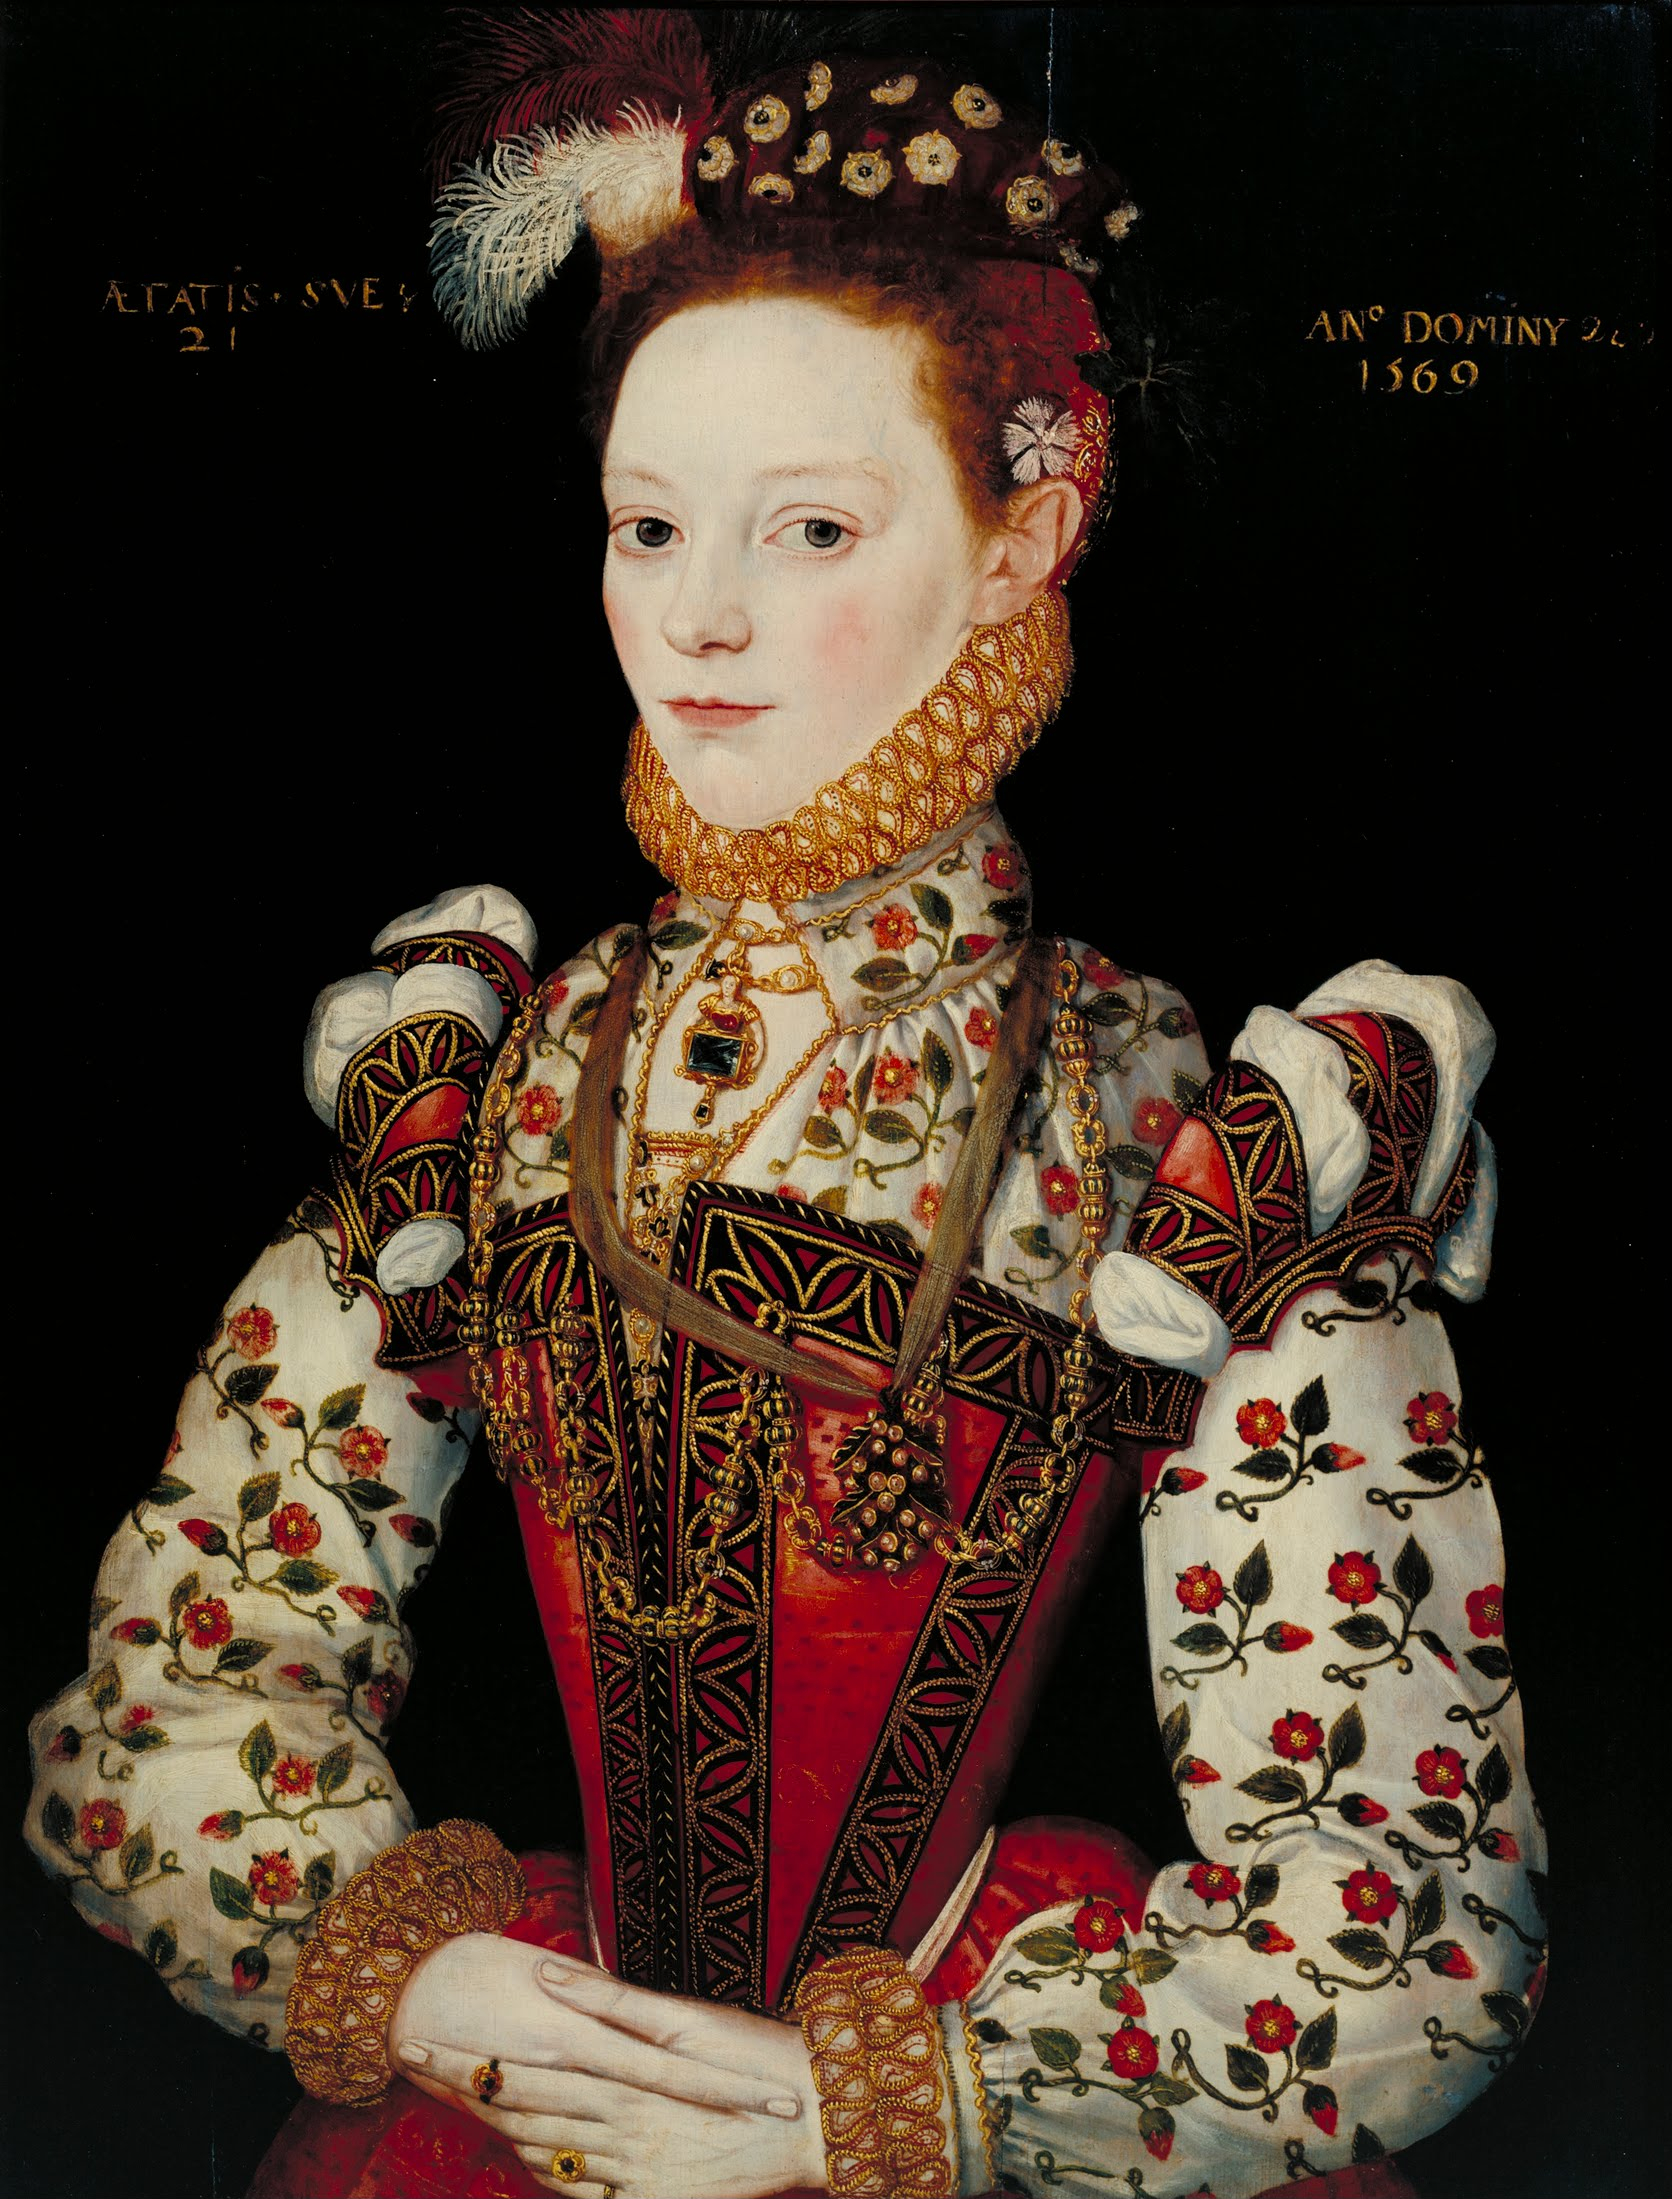 British School 16th century - A Young Lady Aged 21, Possibly Helena Snakenborg - Google Art Project